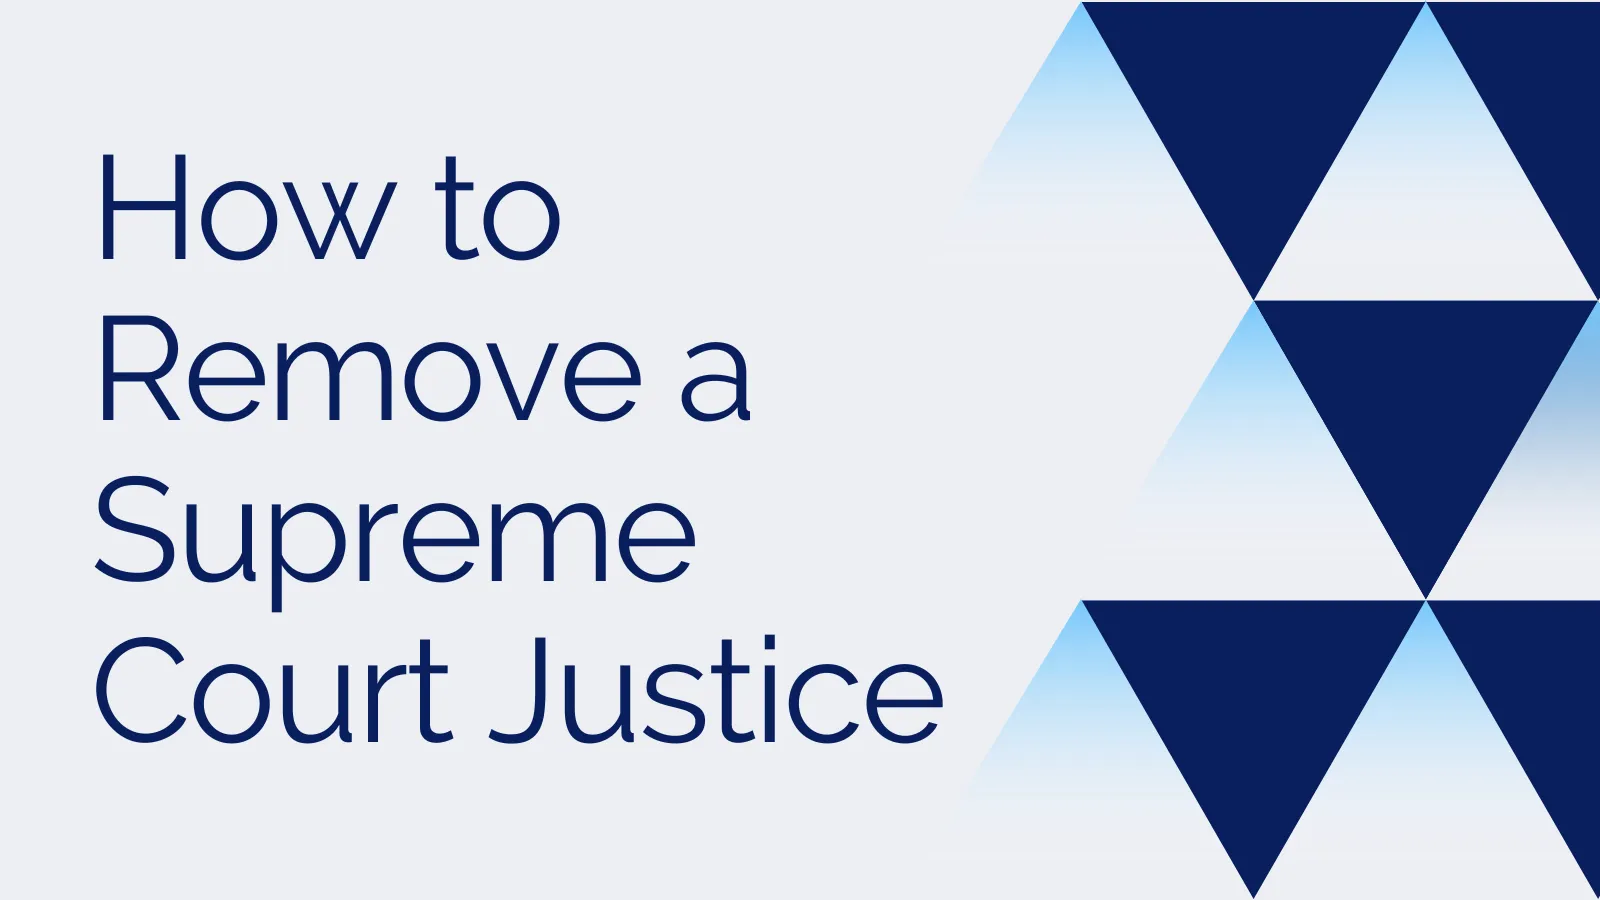 How to Remove a Supreme Court Justice